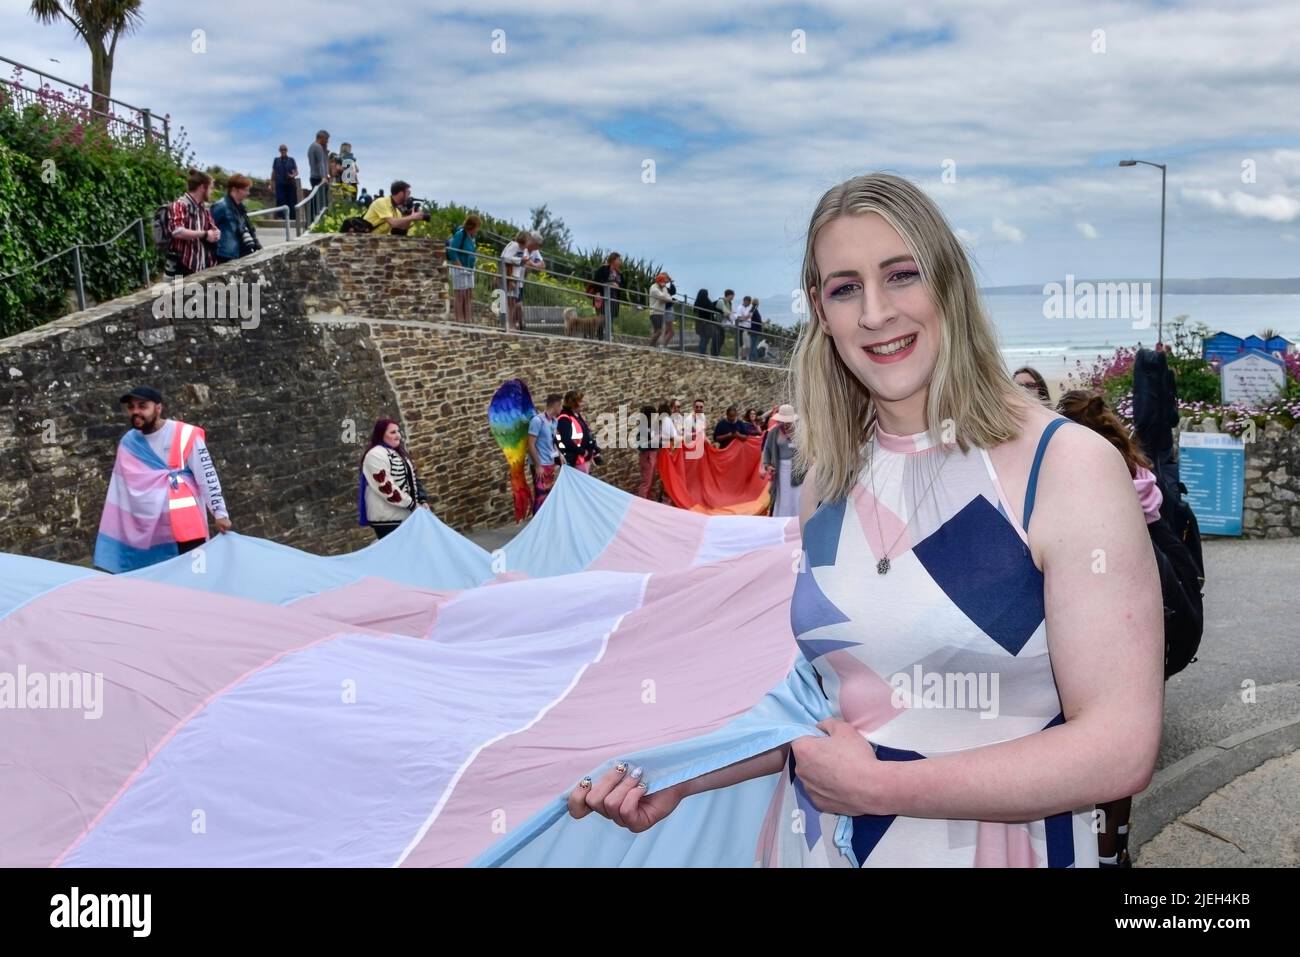 The Pride Transgender Flag held by participants in the Cornwall Prides Pride parade in Newquay Town centre in the UK. Stock Photo